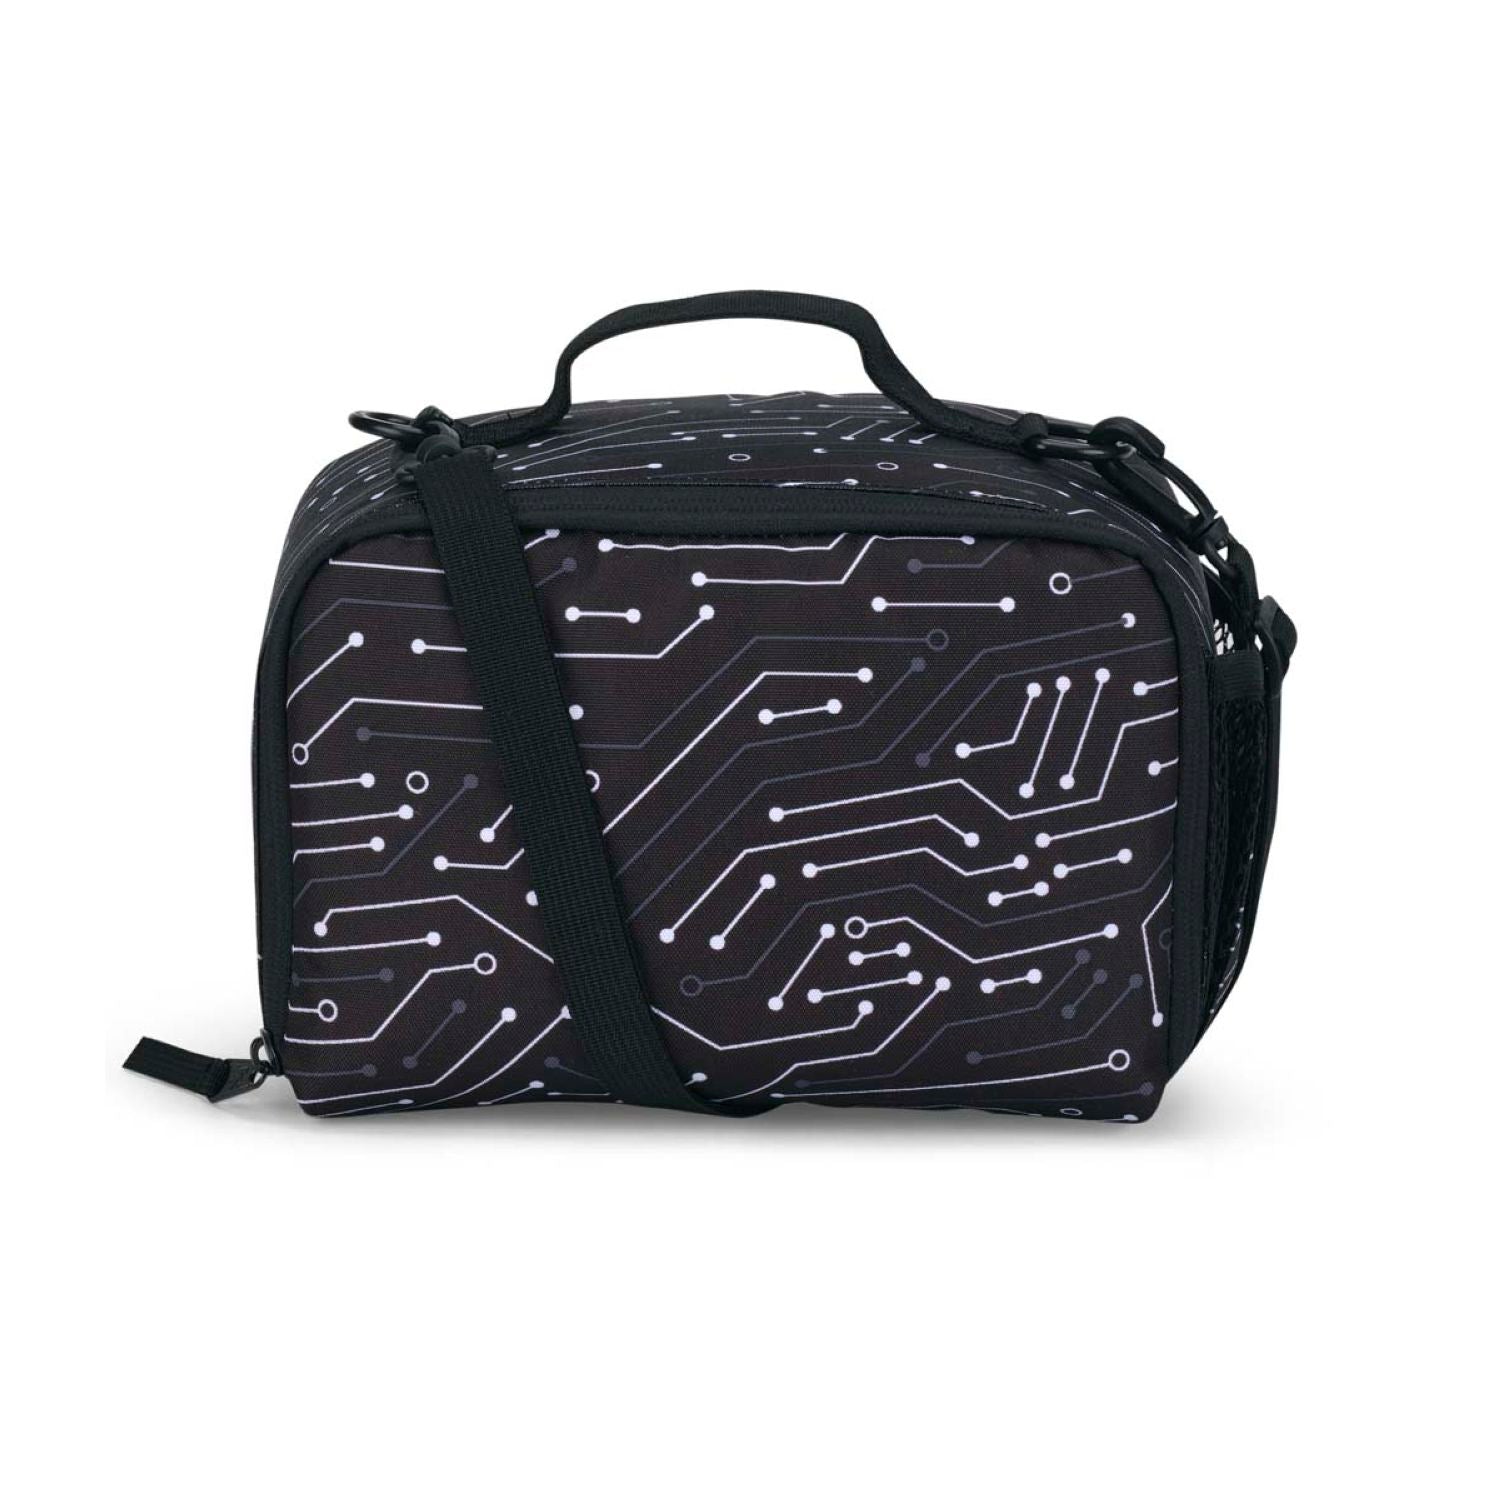 Jansport The Carryout Neural Network